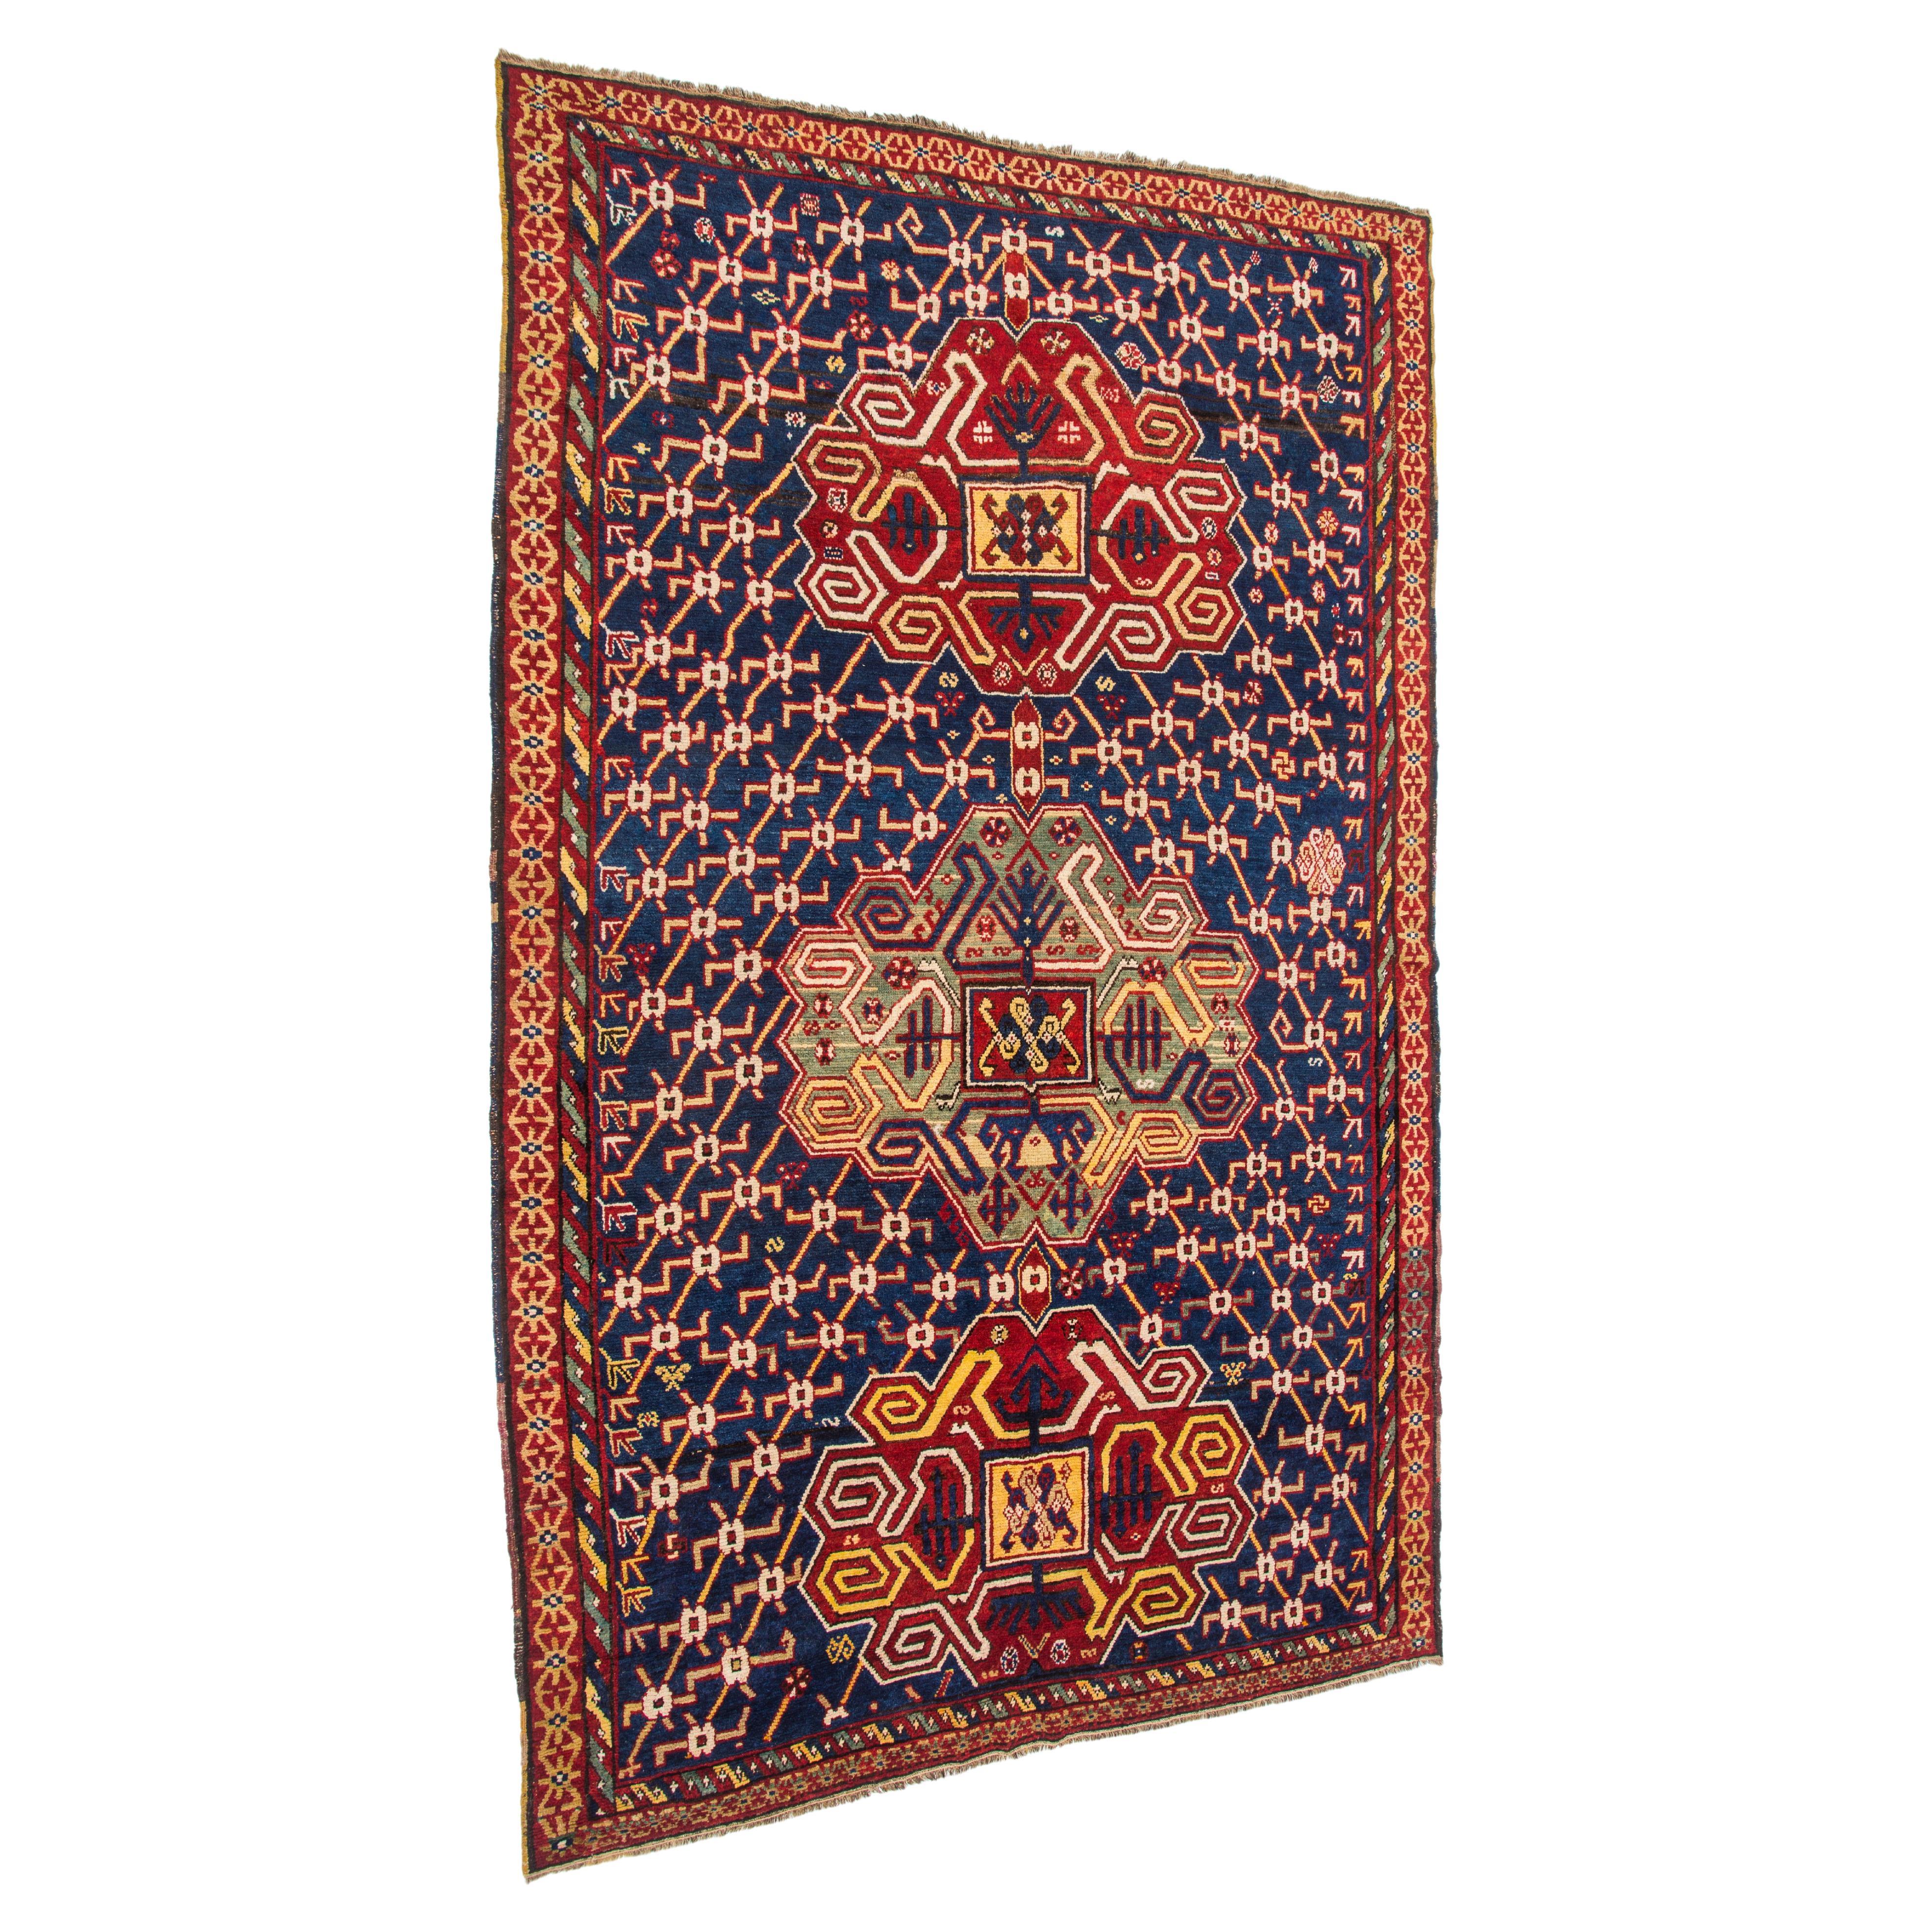 Masculine "mystery" S.Azerbaijan grand format carpet -Antique, 1860 or earlier  For Sale